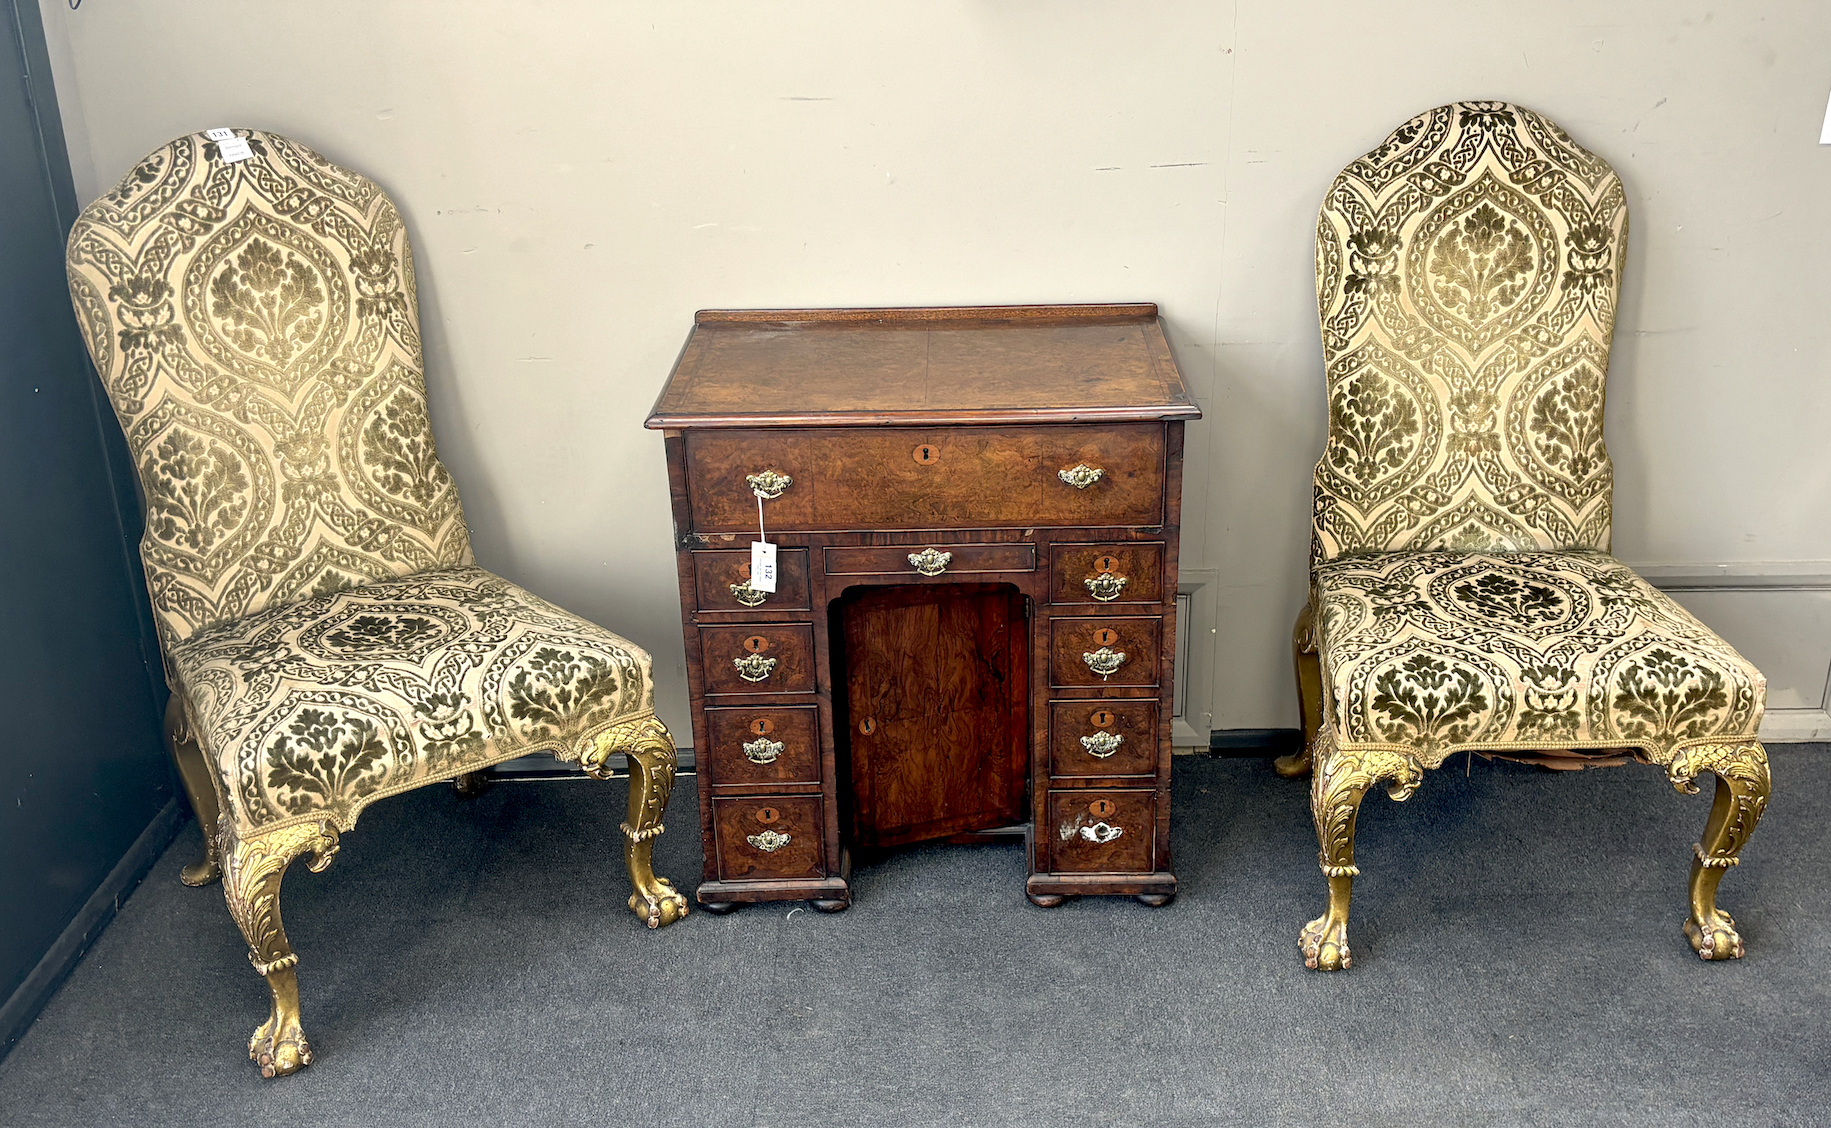 A pair of George II style giltwood side chairs, velvet brocade fabric, width 64cm, depth 64cm, height 114cm